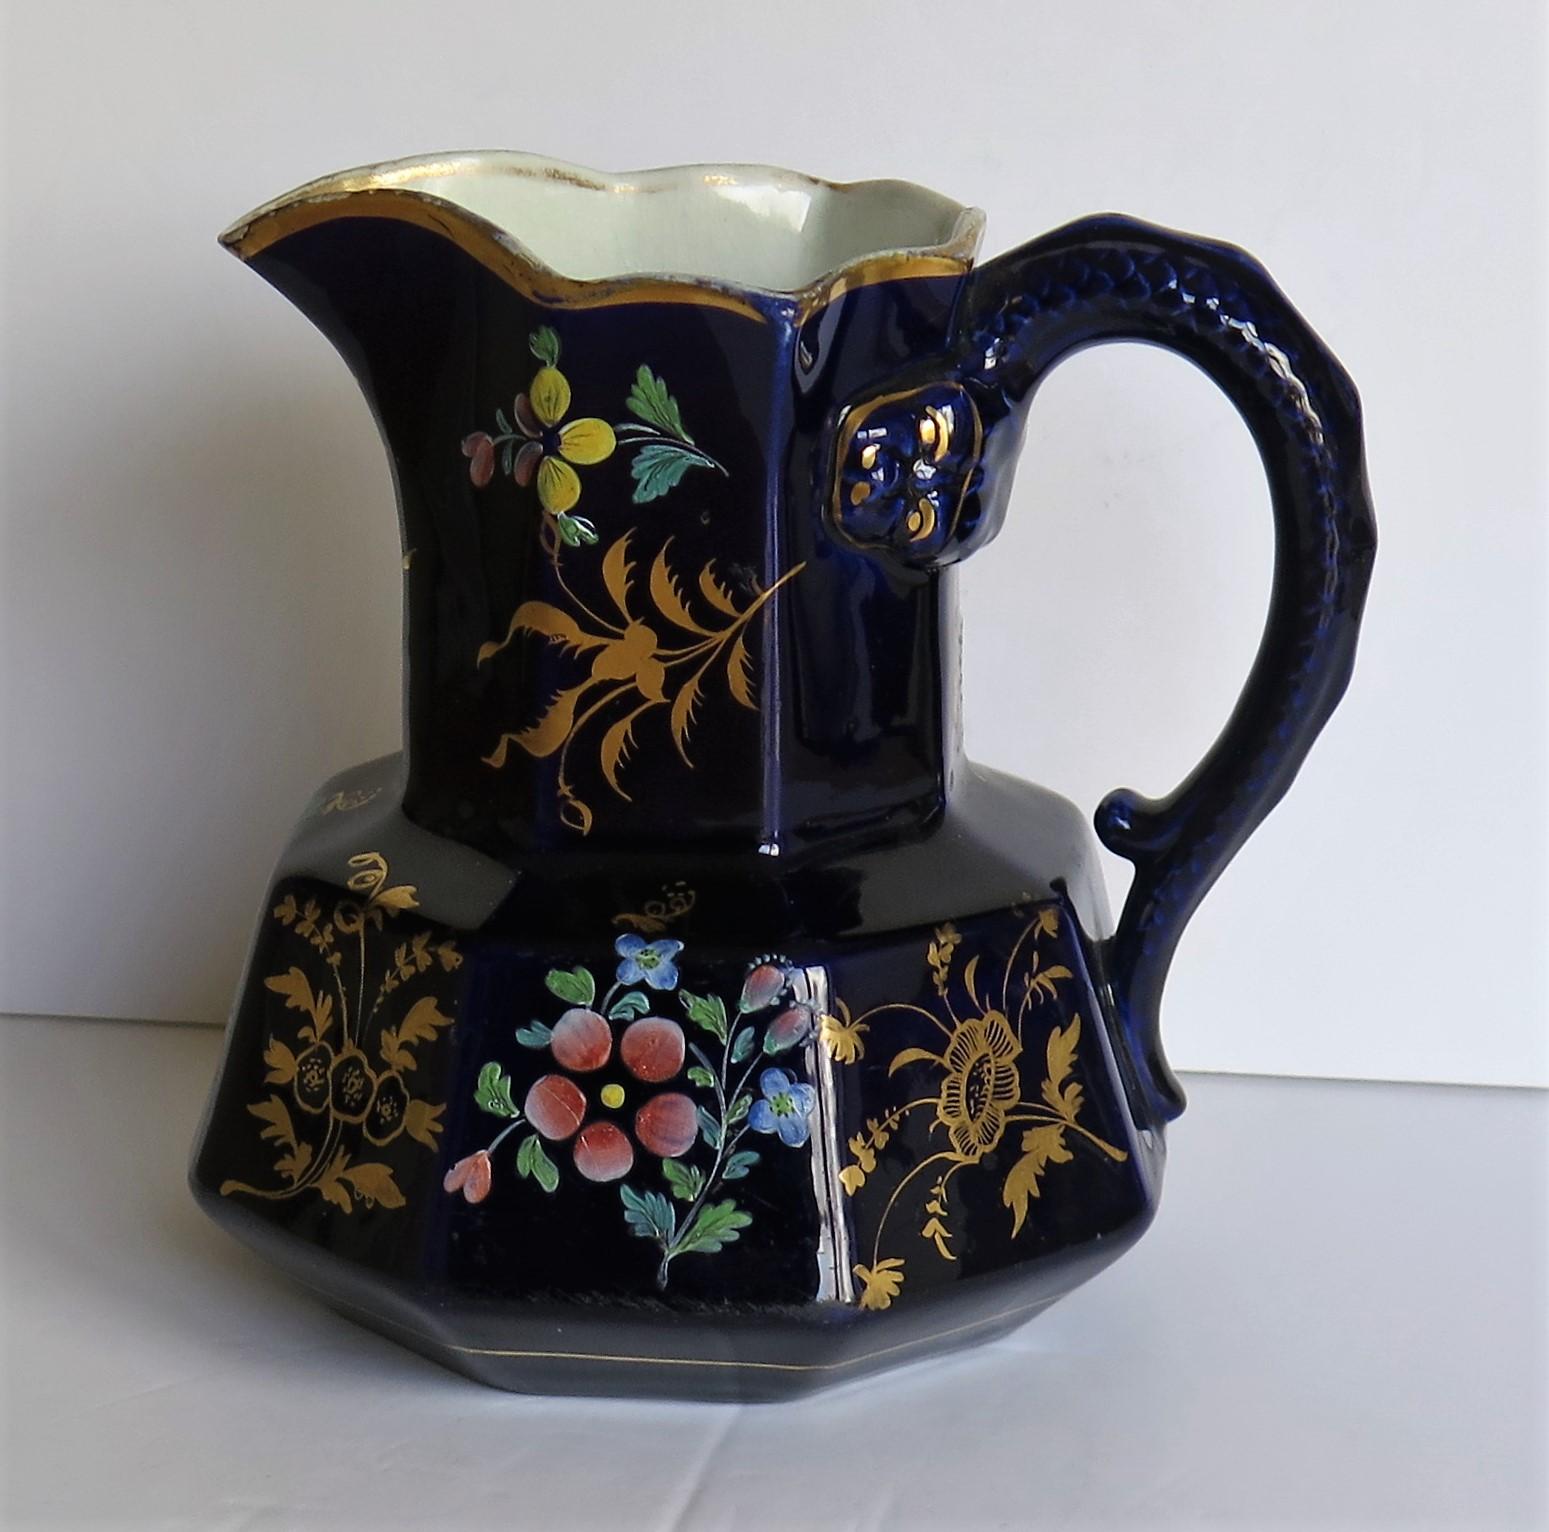 This is a rare ironstone jug or pitcher in the Hydra Shape finely hand decorated and made by Zachariah Boyle of Hanley and Stoke, England, circa 1830.

Pieces by this manufacturer are rare, particularly with the impressed mark.

The jug has an